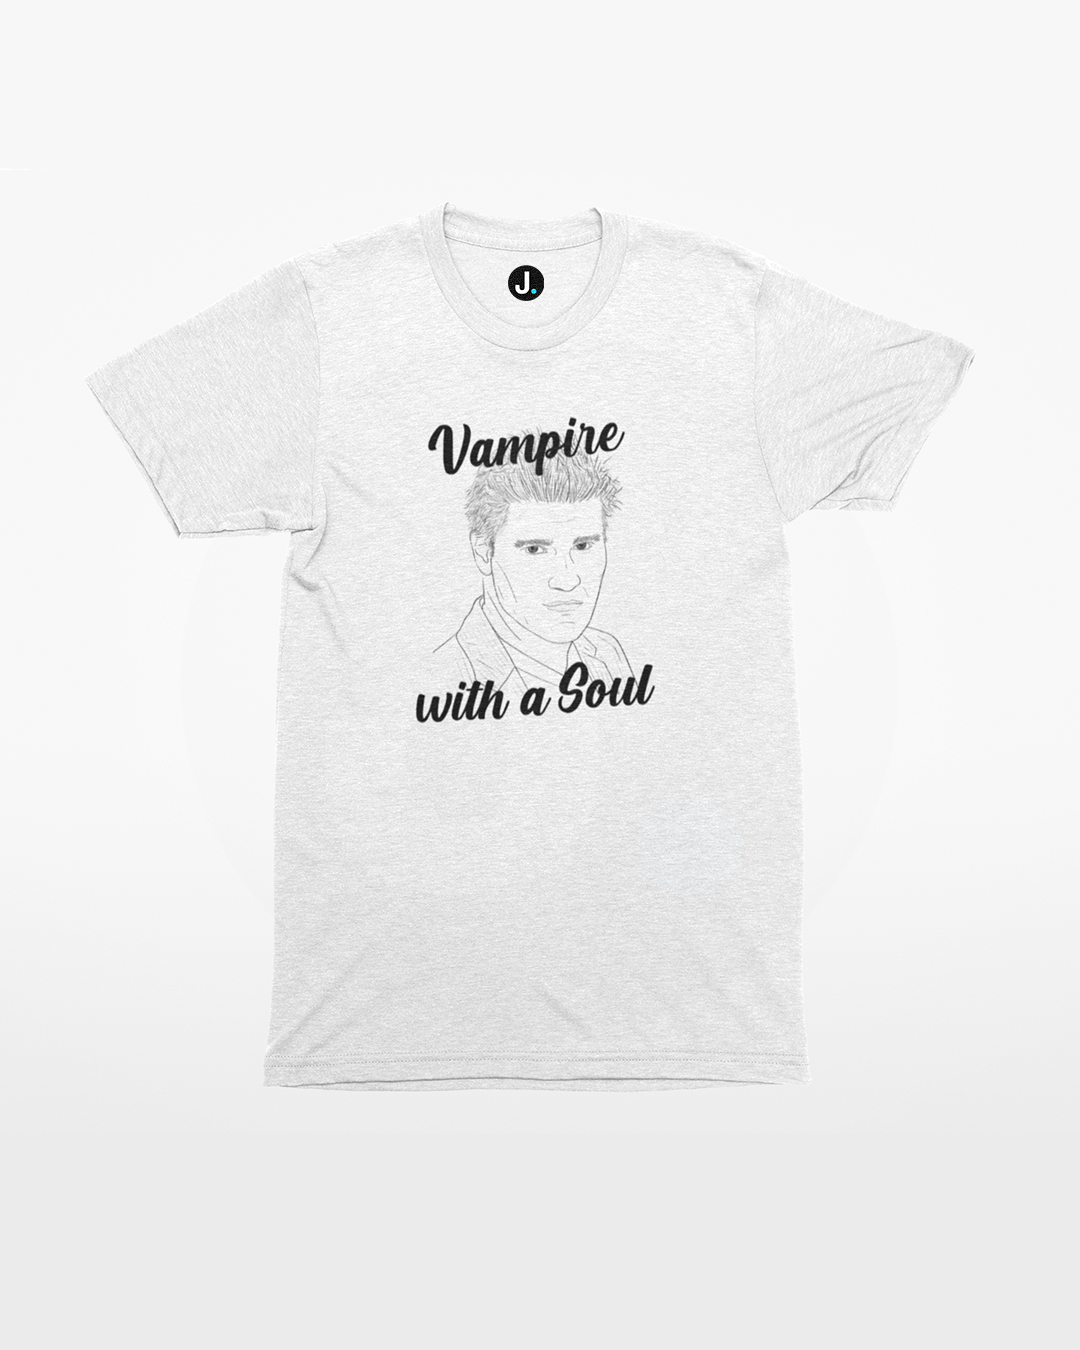 Vampire With A Soul T-Shirt - Buffy The Vampire Slayer Inspired T-Shirt - Buffy Angel T-Shirt - Vampire With A Soul Buffy The Vampire Slayer Inspired T-Shirt